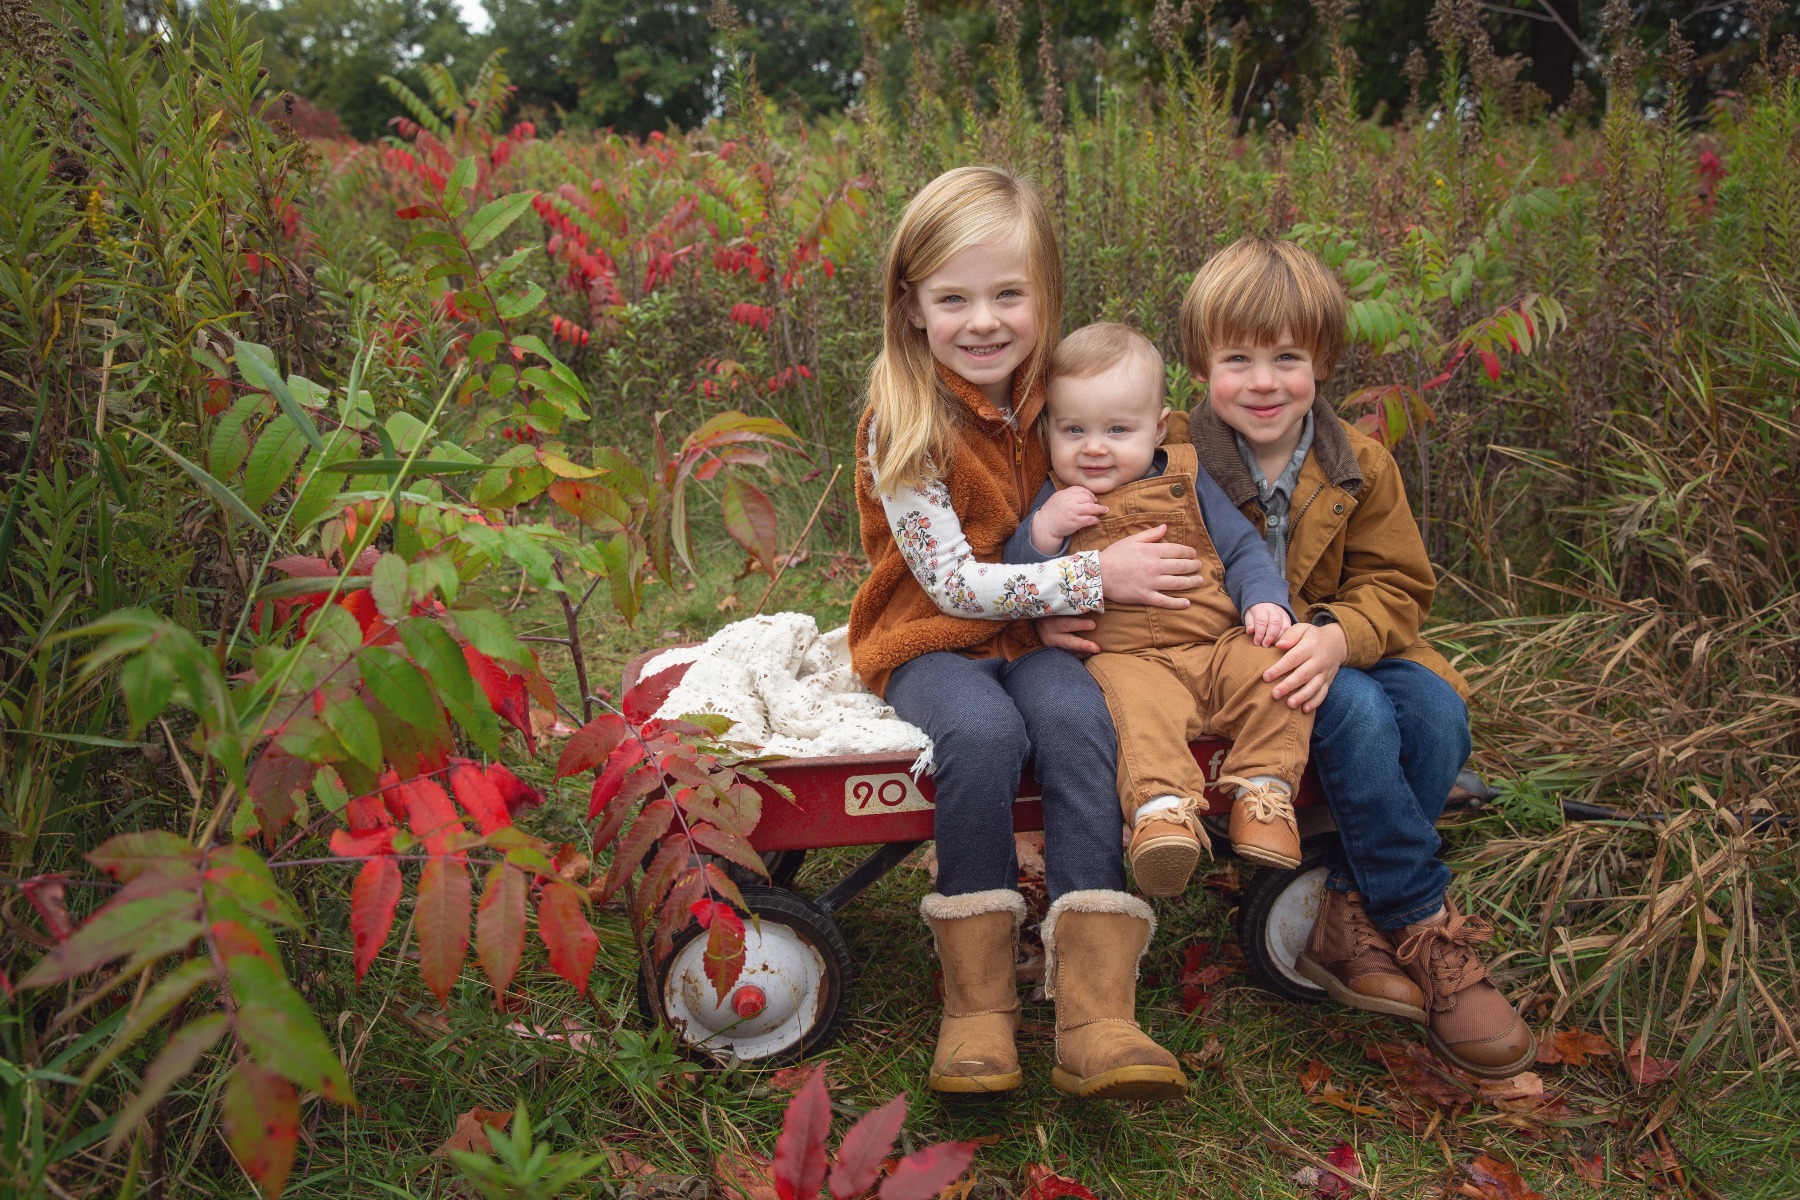 three siblings sit together in a red wagon in a field of fall colors